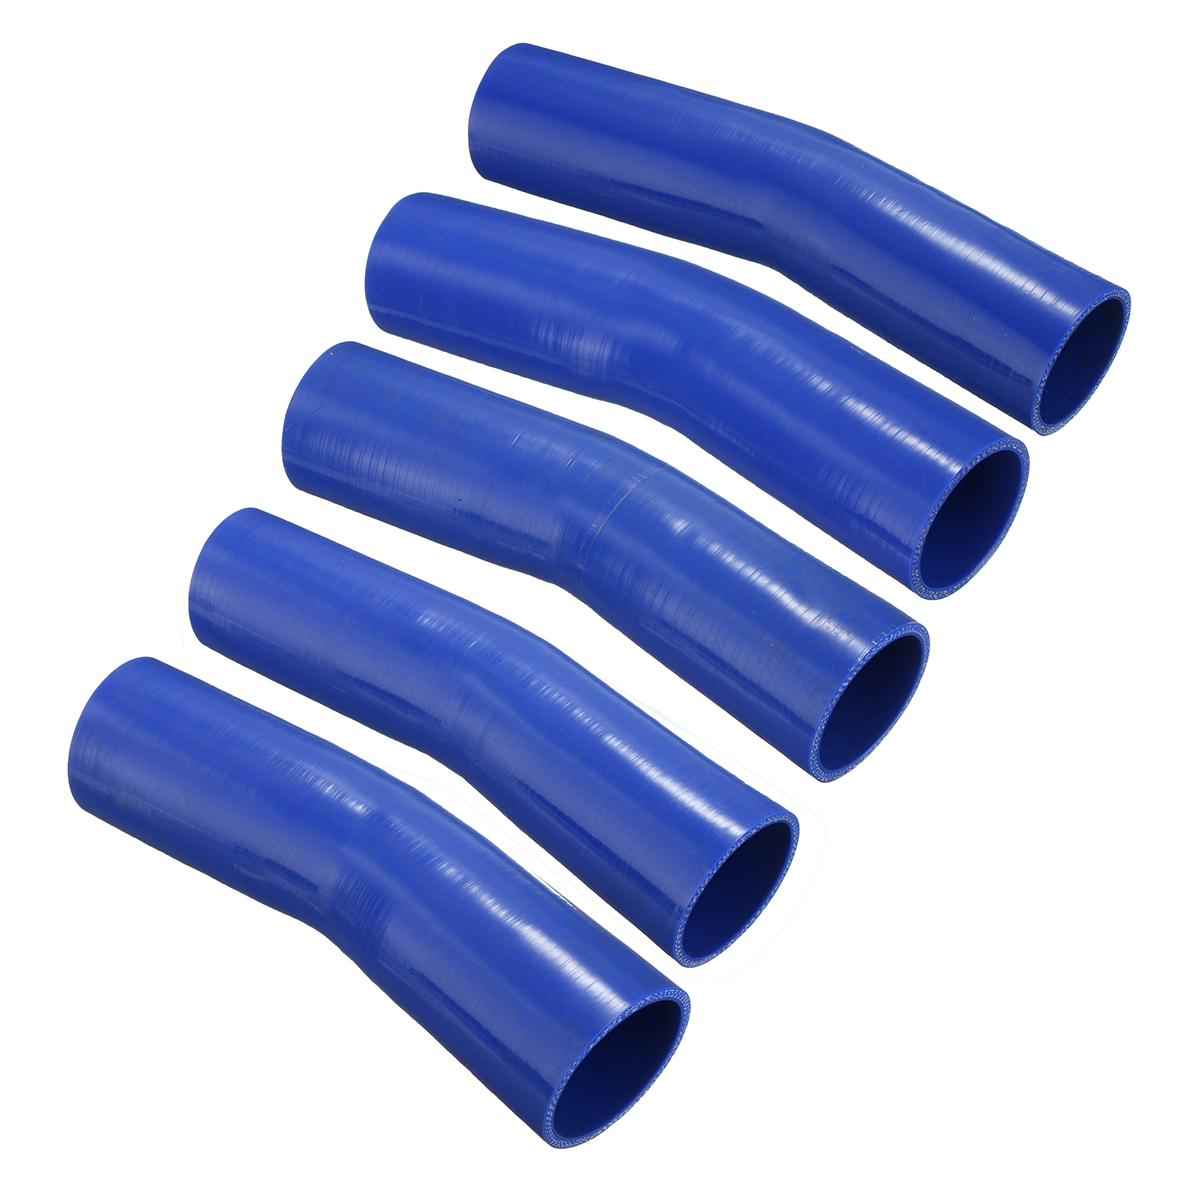 150mm-Silicone-Hose-Rubber-15-Degree-Elbow-Bend-Hose-Air-Water-Coolant-Joiner-Pipe-Tube-1587657-2